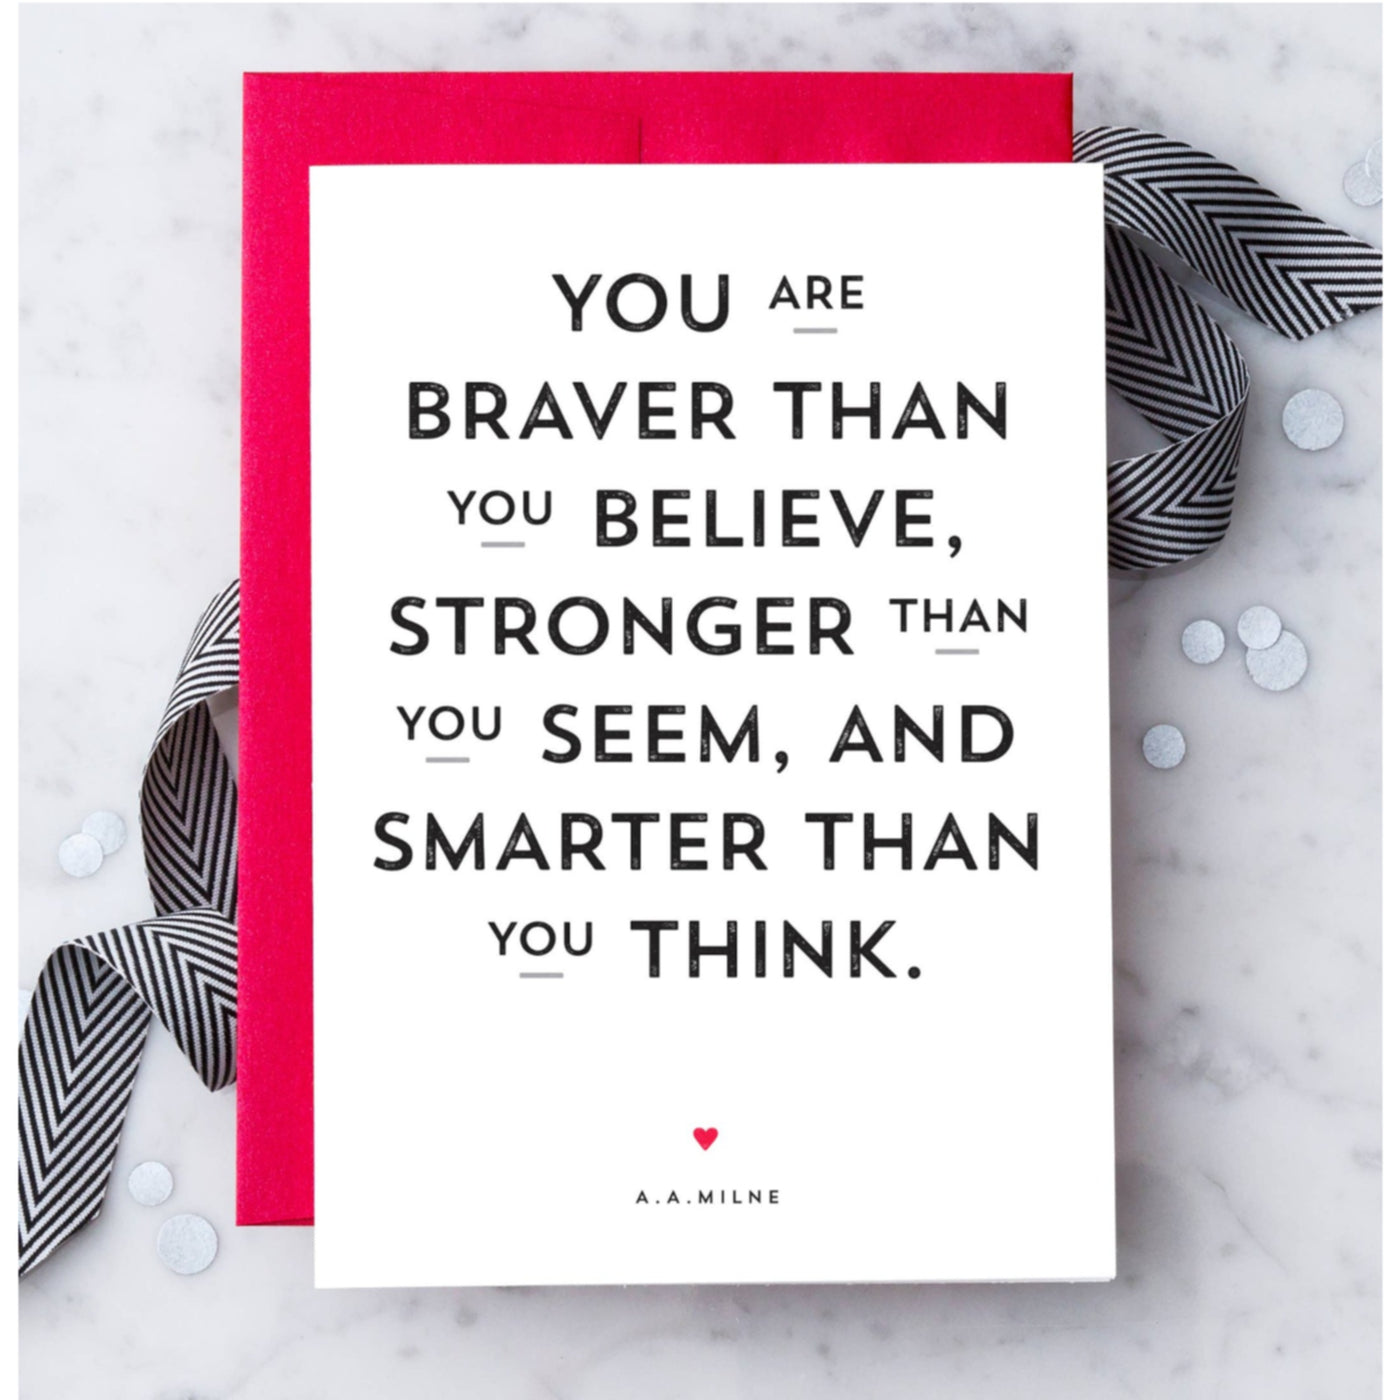 You Are Braver Than You Believe Greeting Card